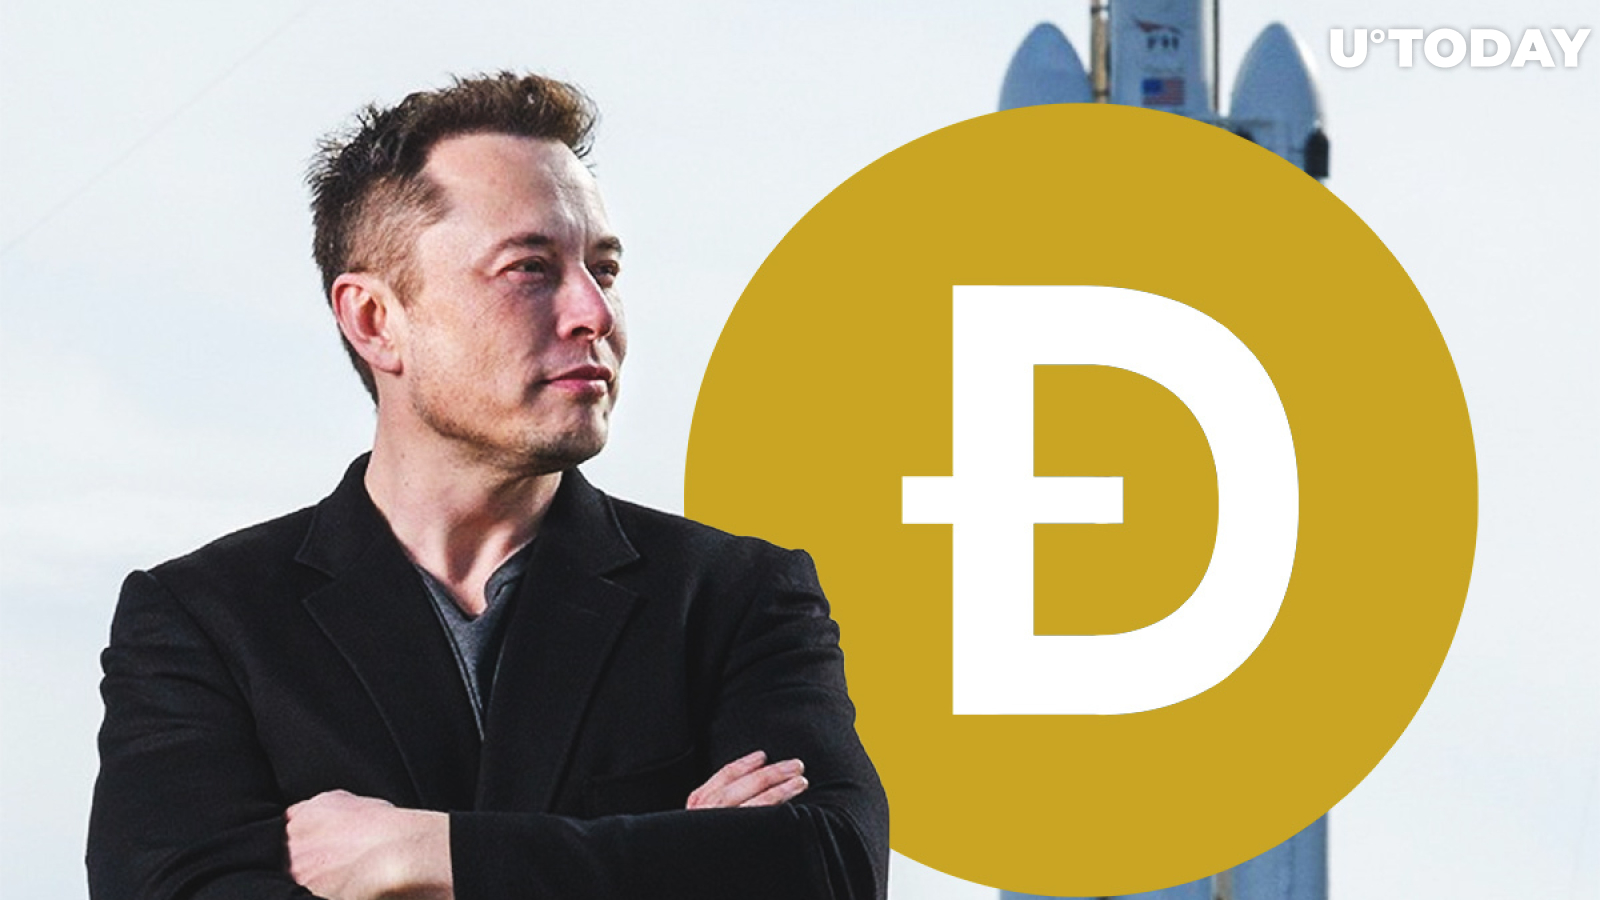 Elon Musk Claims Dogecoin Will Win “Hands Down” Against Bitcoin if It Scales